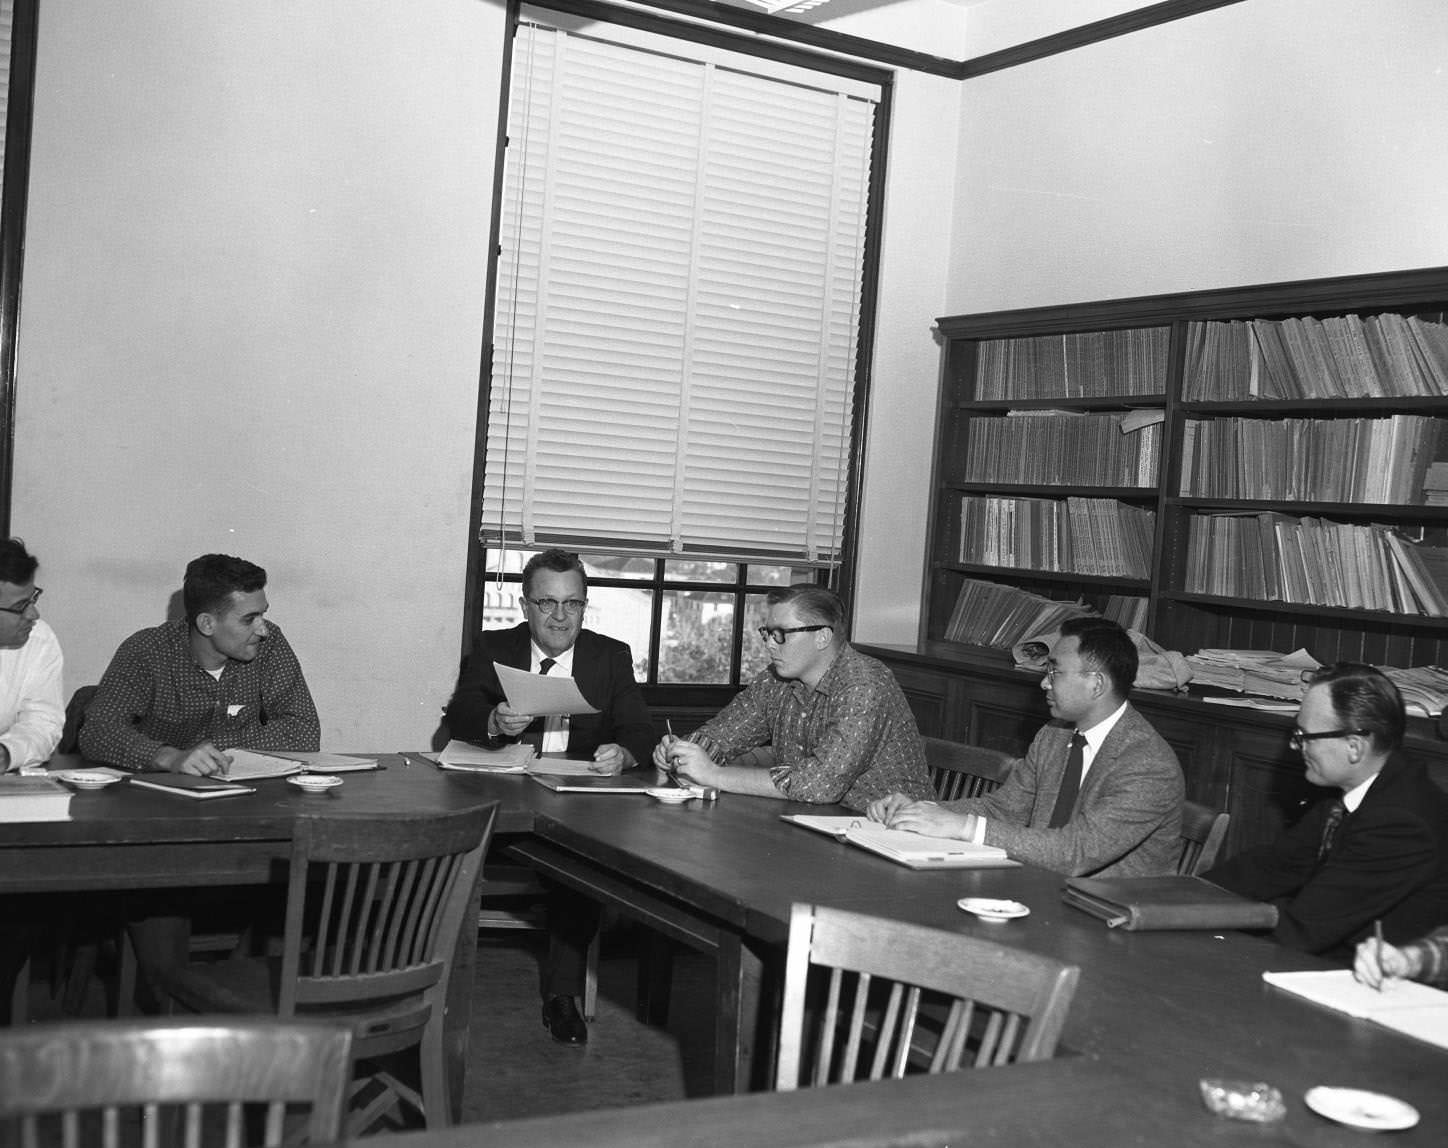 Men in discussion at table, probably administrators, 1958